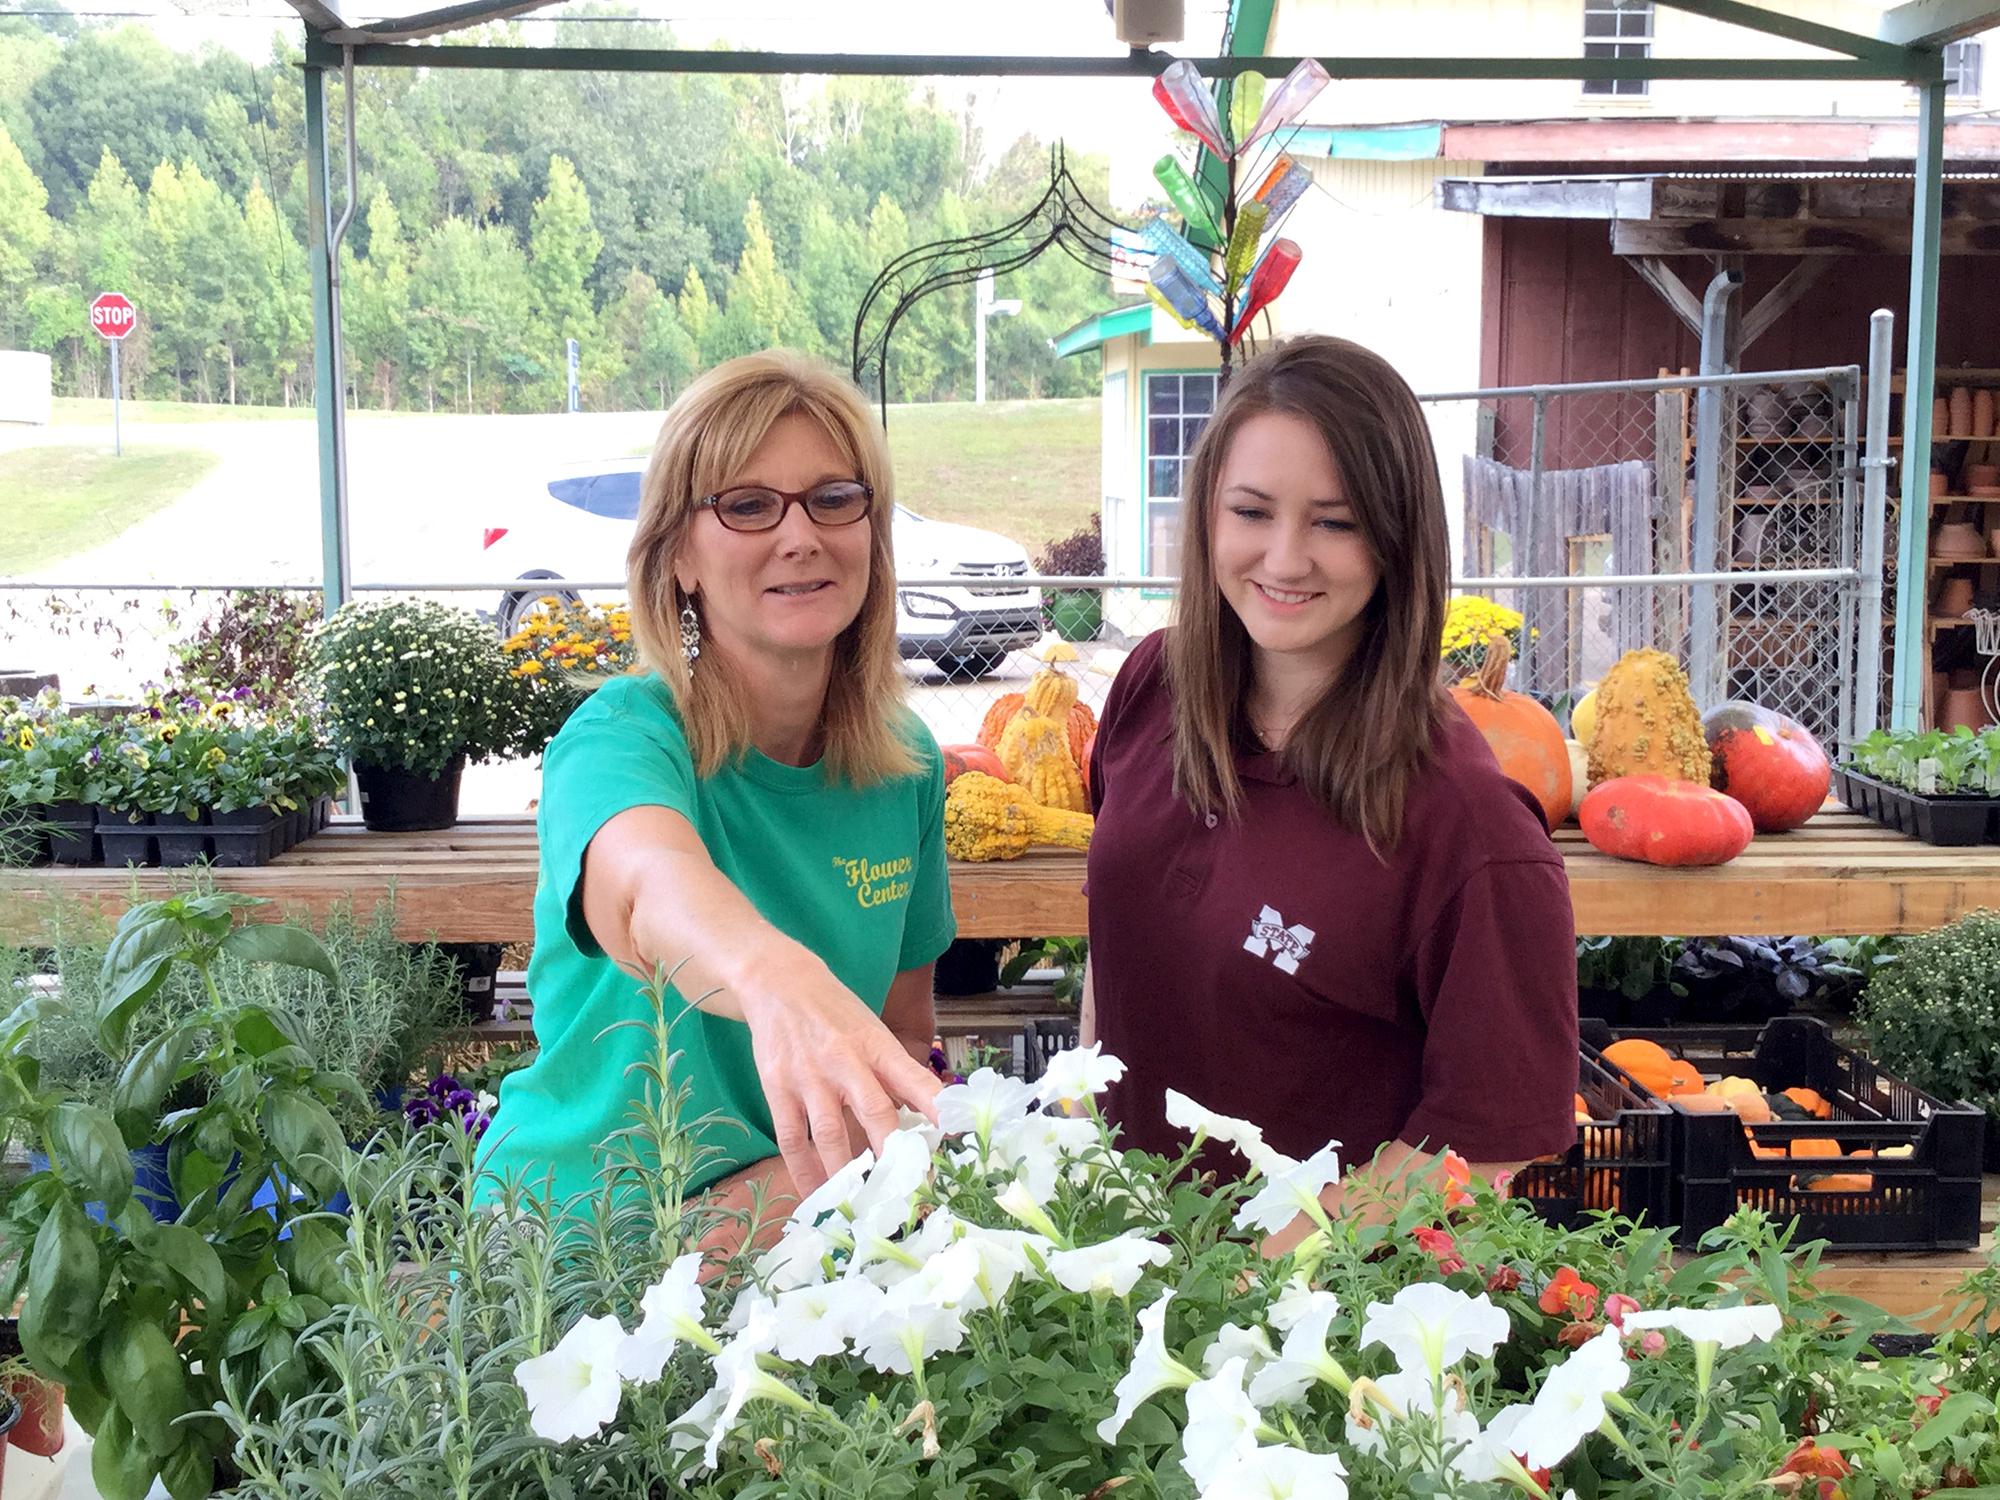 Libby Beard, co-owner of The Flower Center in Vicksburg, Mississippi, left, and Anna McCain, Warren County Extension agent, look over some of the fall bedding flowers available on Oct. 7, 2015. (Submitted photo)